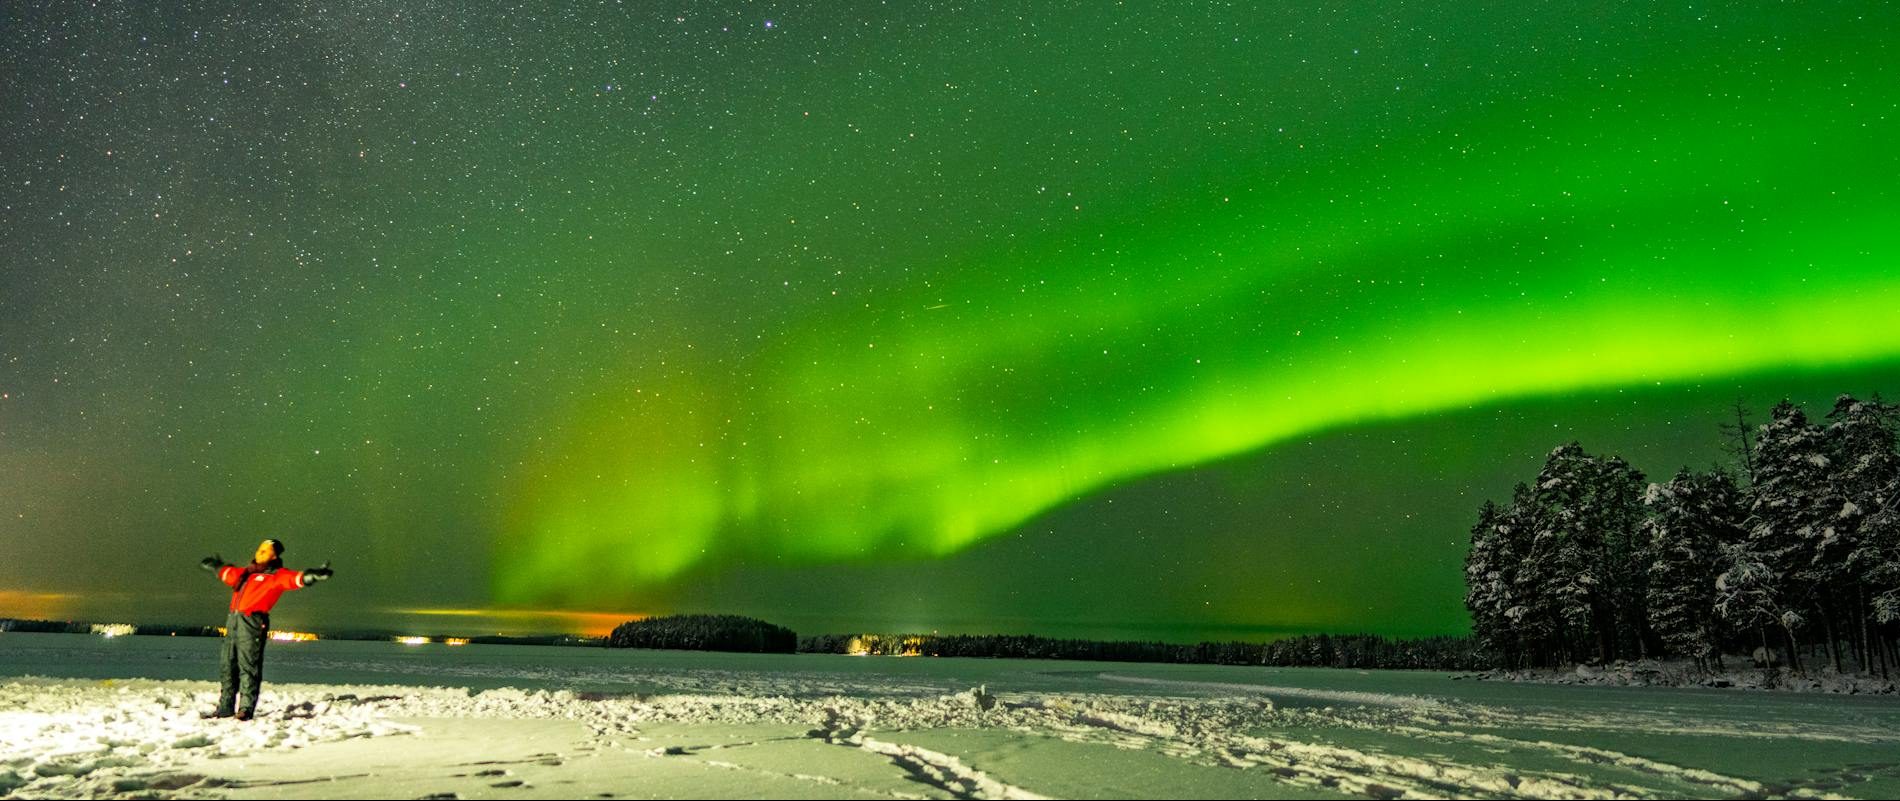 Is Finland the Happiest Place on Earth - The Northern Lights